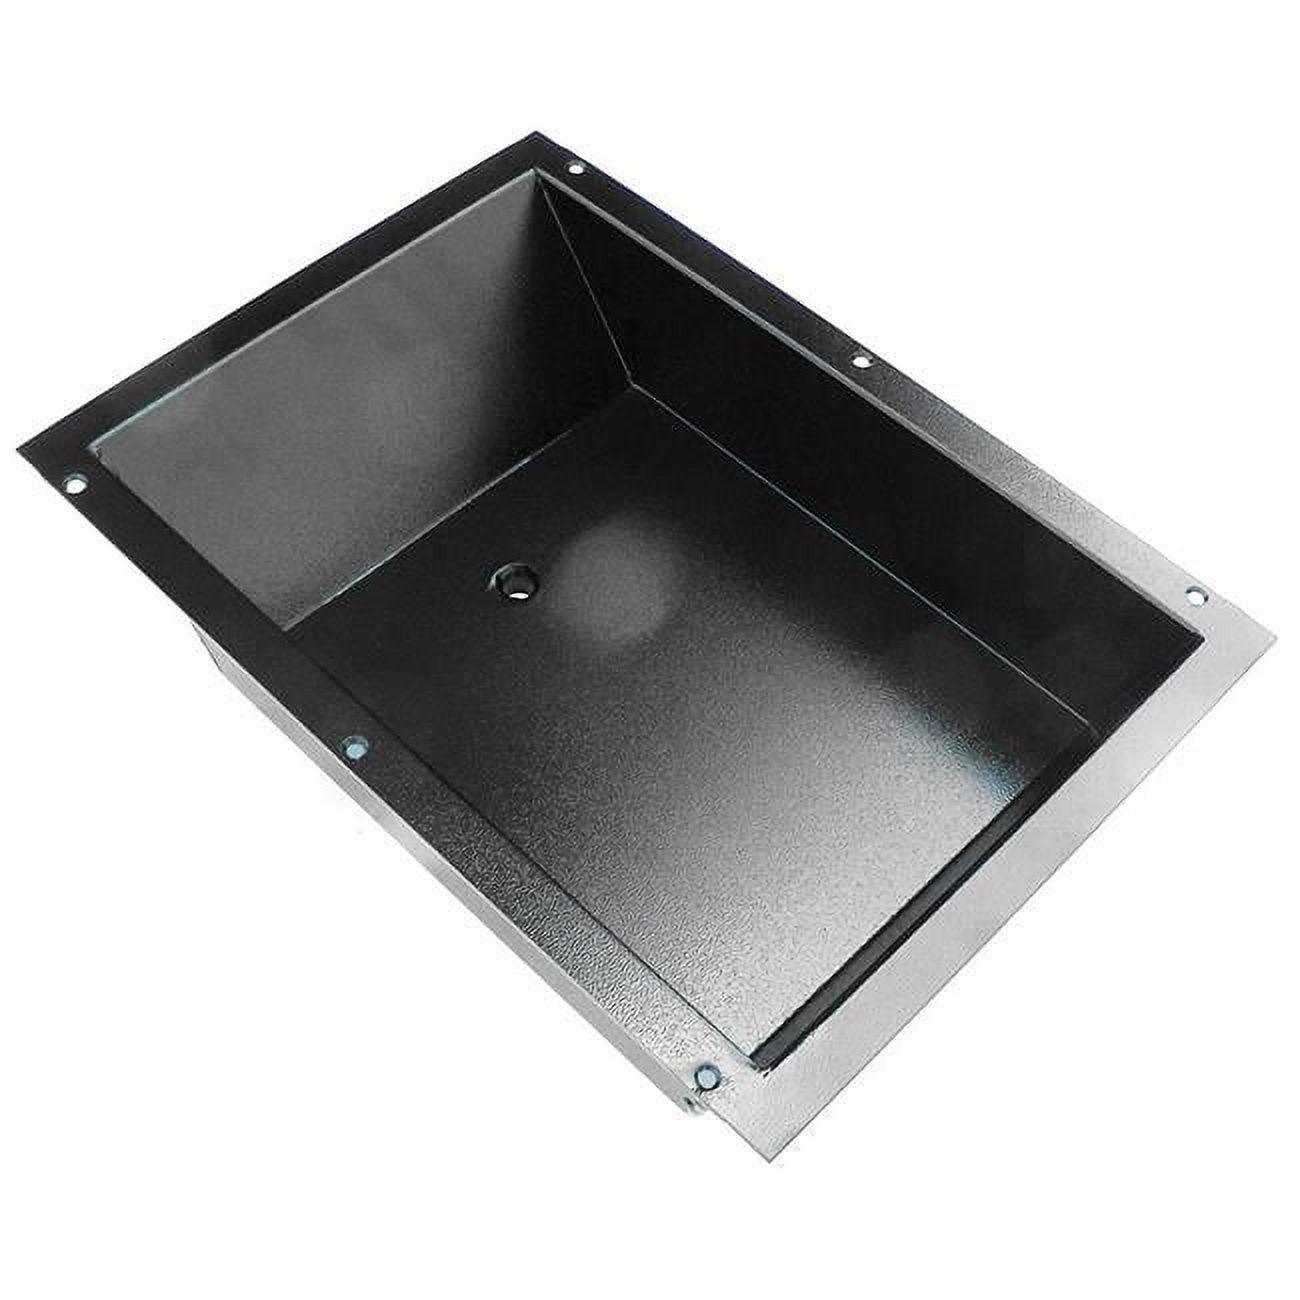 "MotorGuide Rod Saver Recessed Tray for Trolling Motor Foot Control" - image 1 of 2